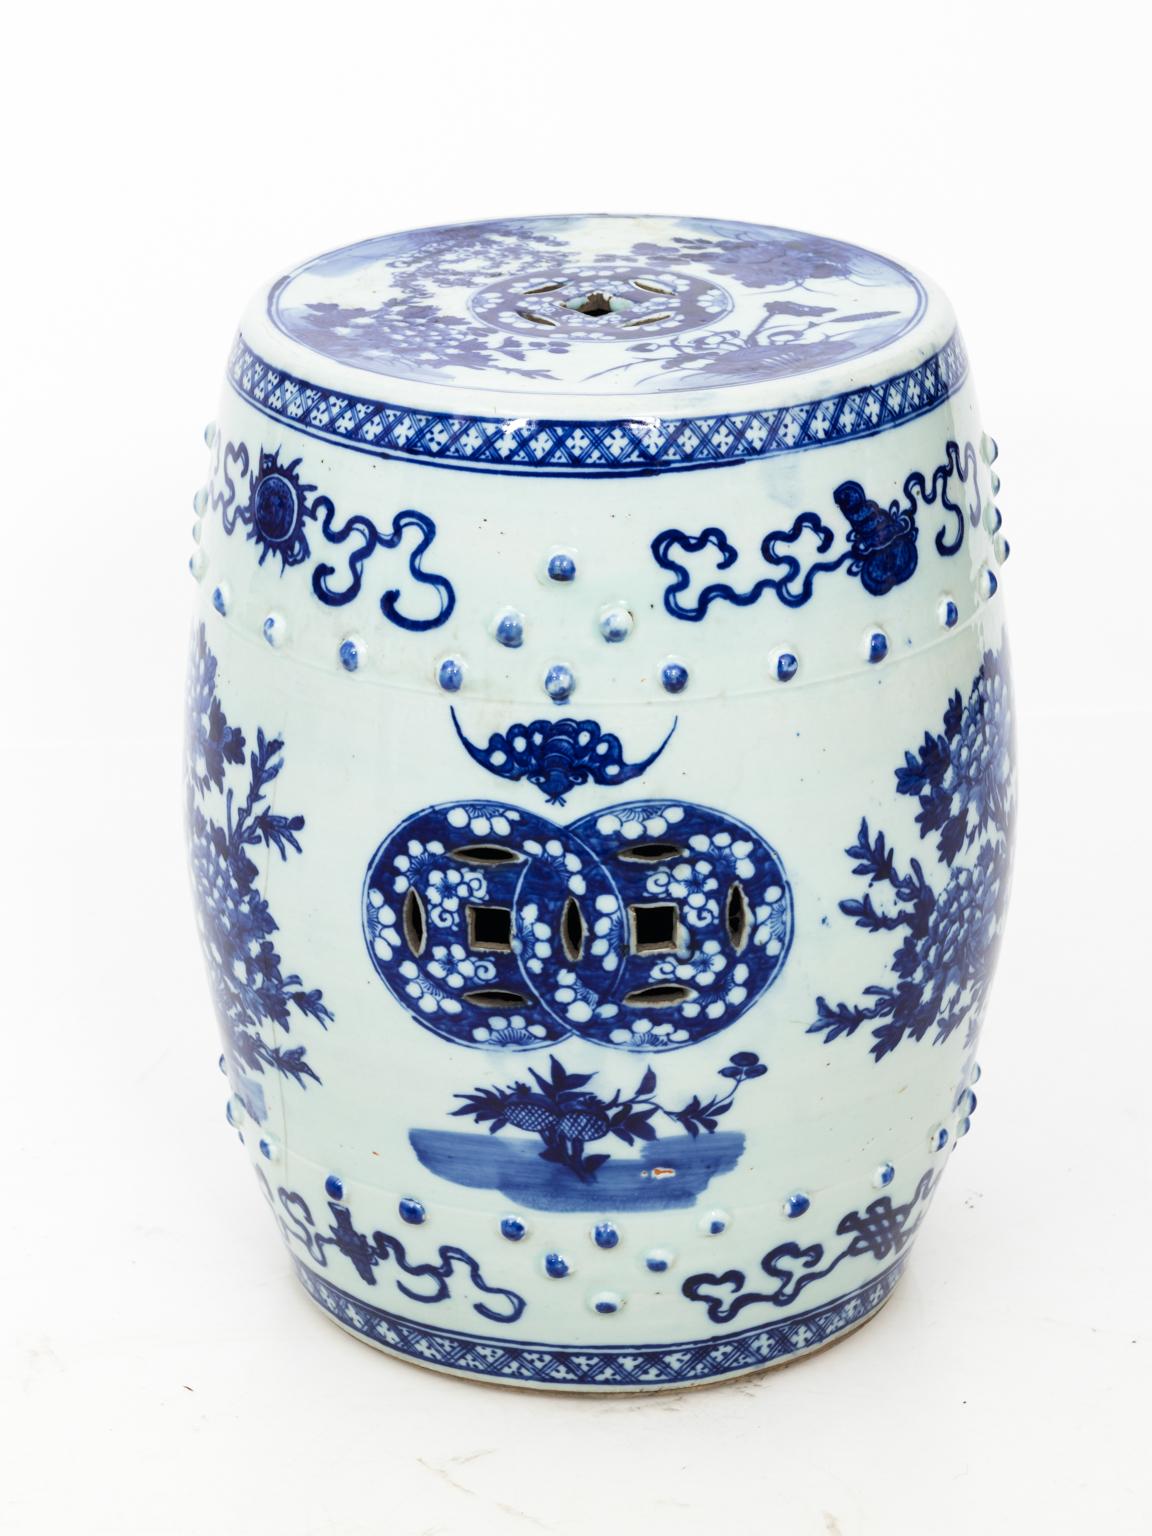 Blue and White Chinese porcelain garden seat with a butterfly motif. Please note of wear consistent with age to the glazed finish, circa 20th century.